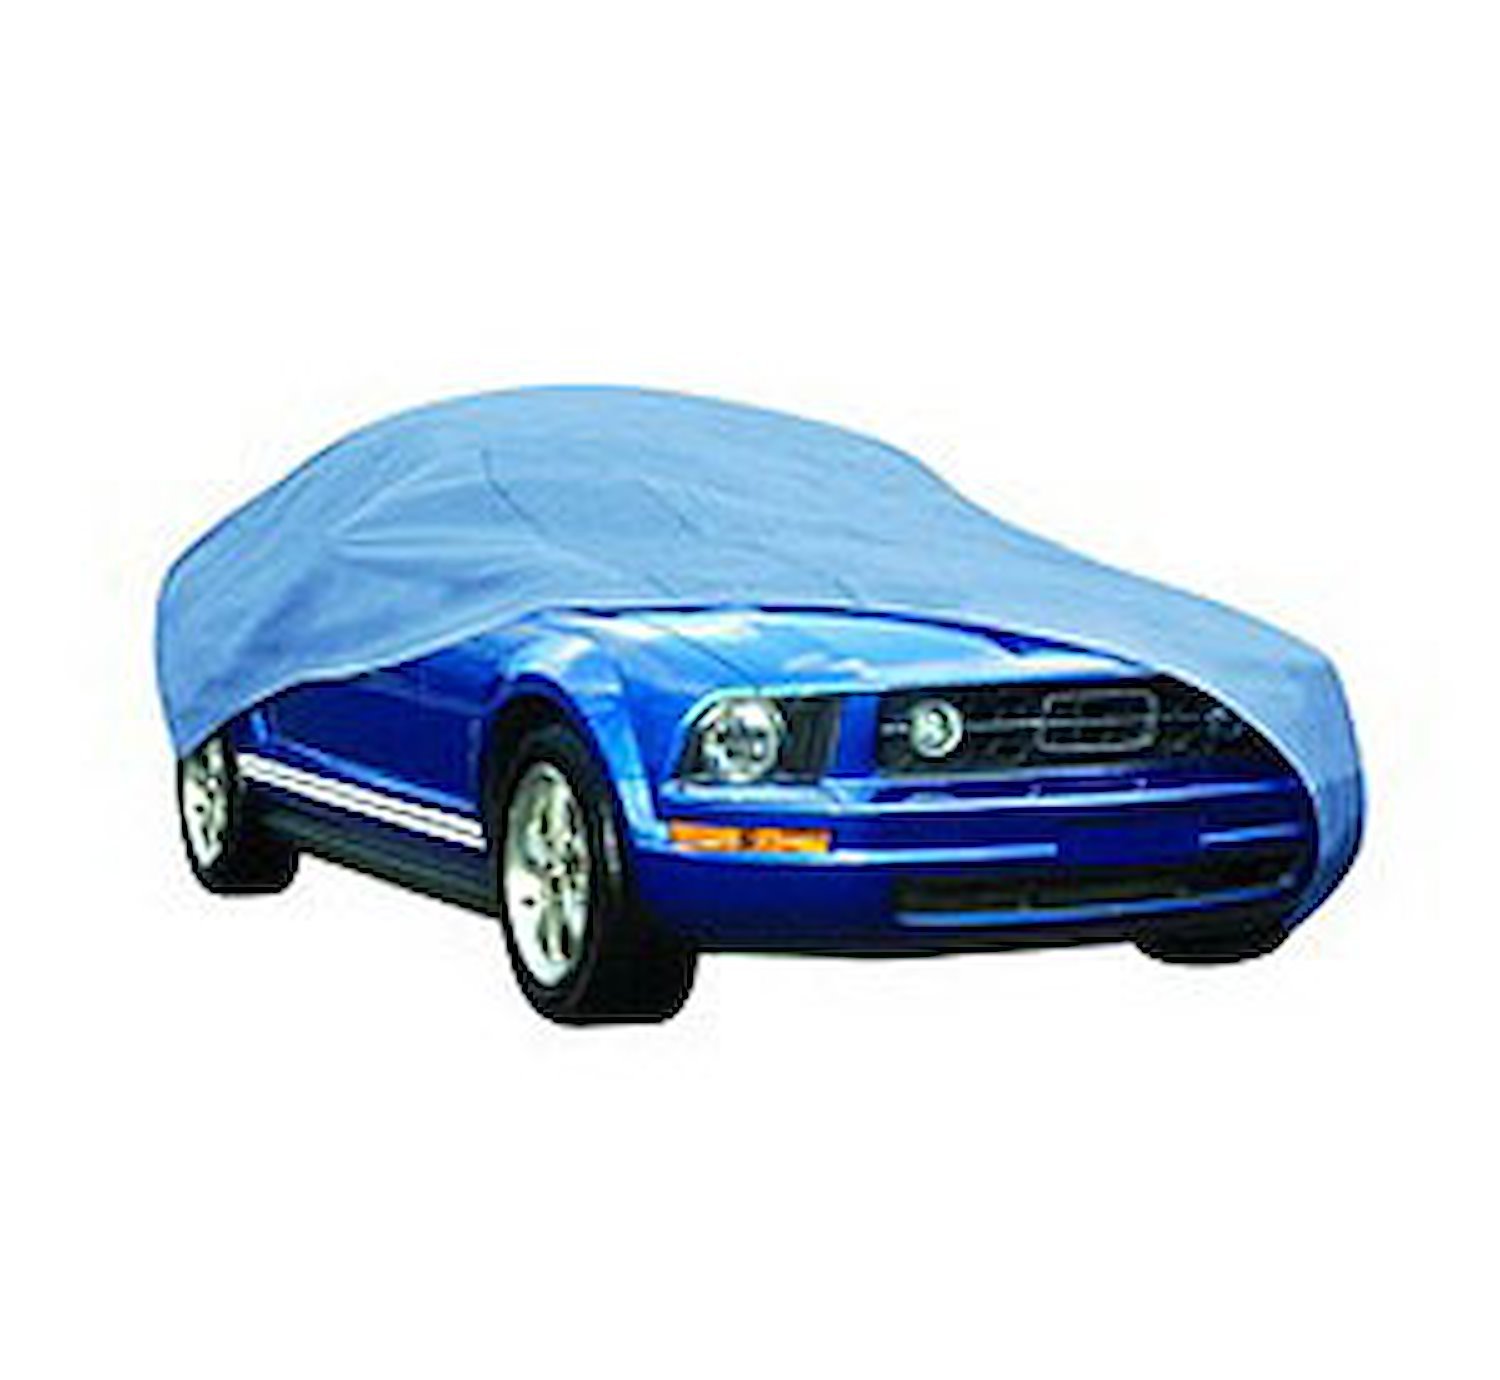 Duro Car Cover Fits Cars Up To 16